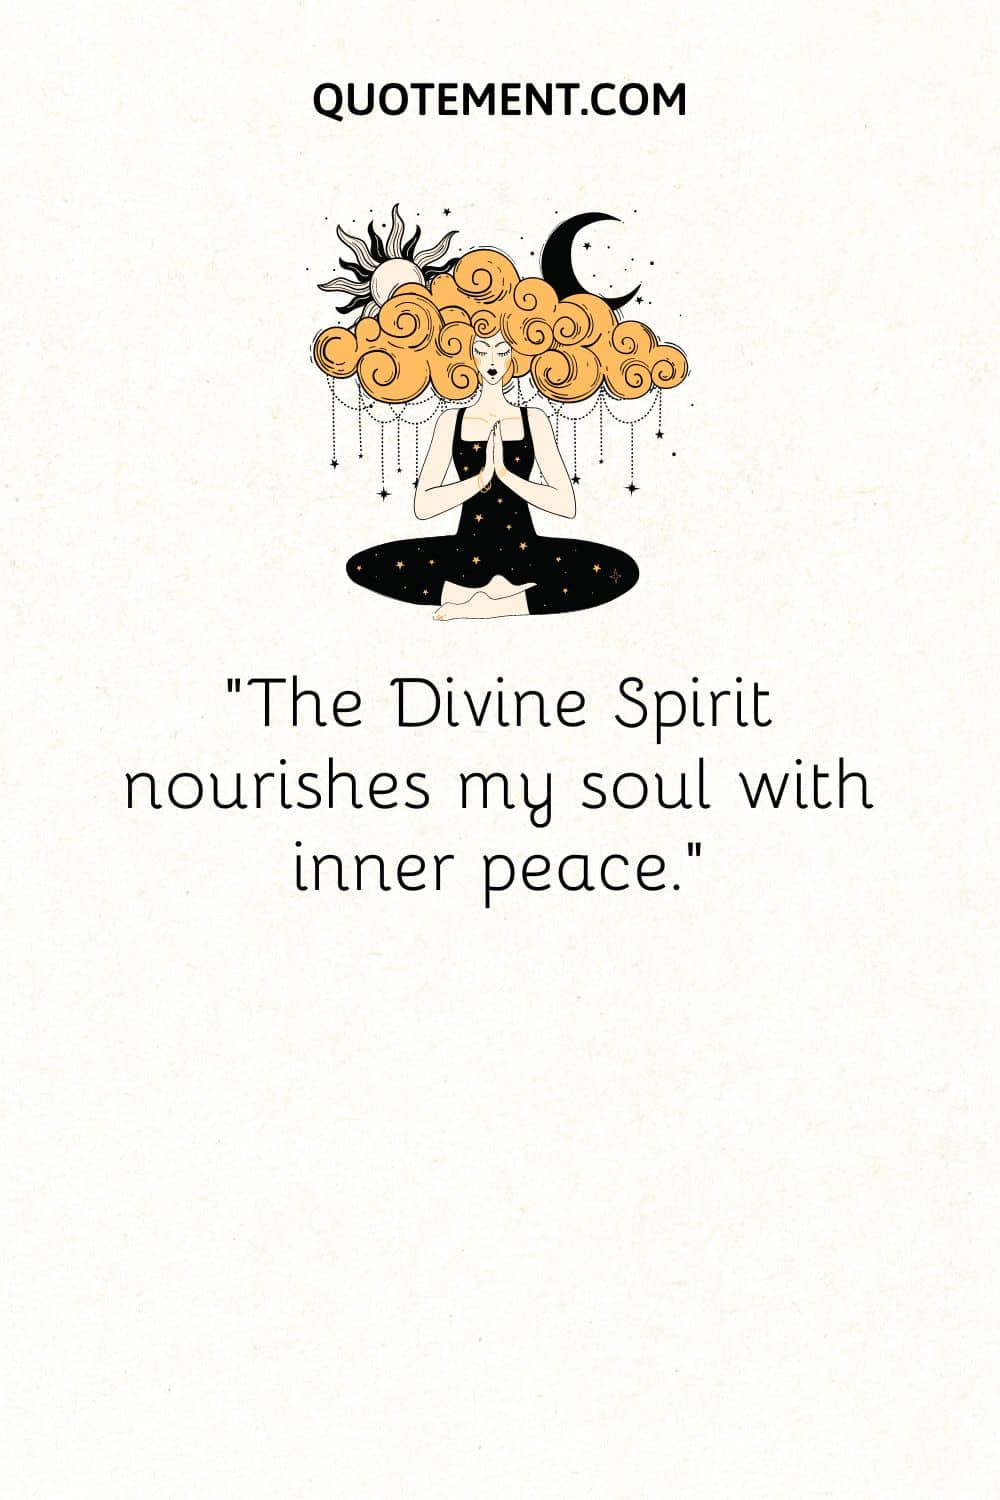 The Divine Spirit nourishes my soul with inner peace